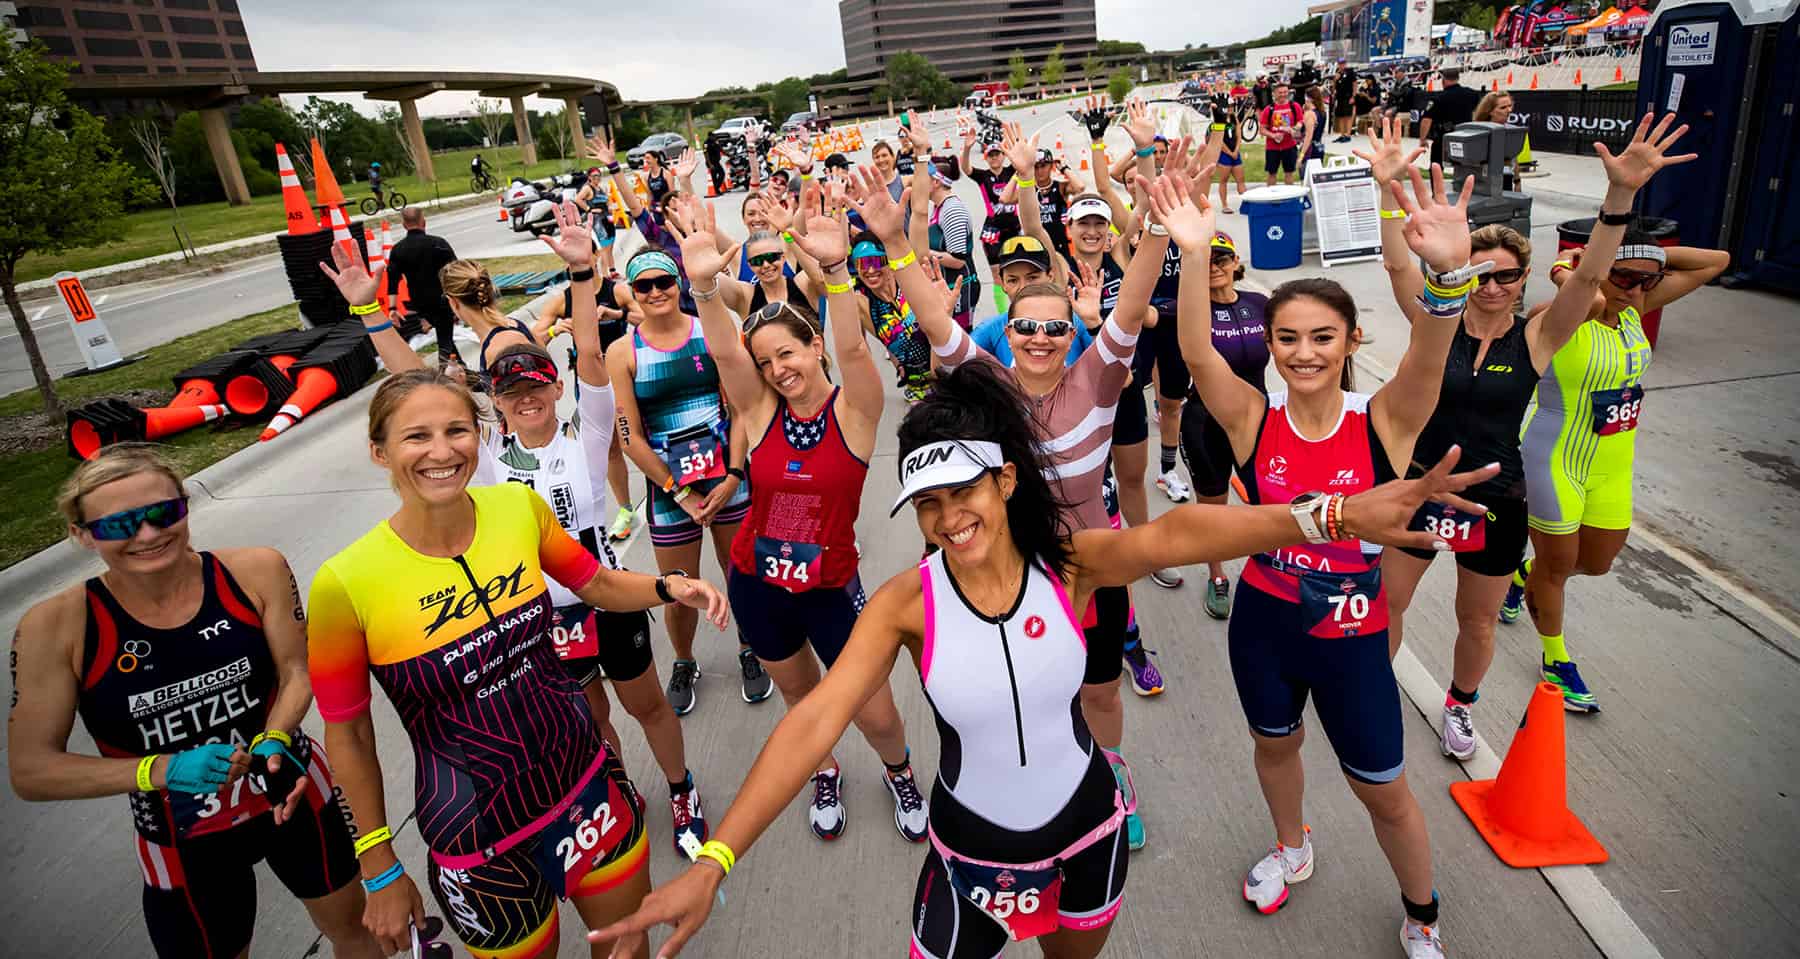 USA Triathlon Club National Champs Confirmed For PTO US Open PTO